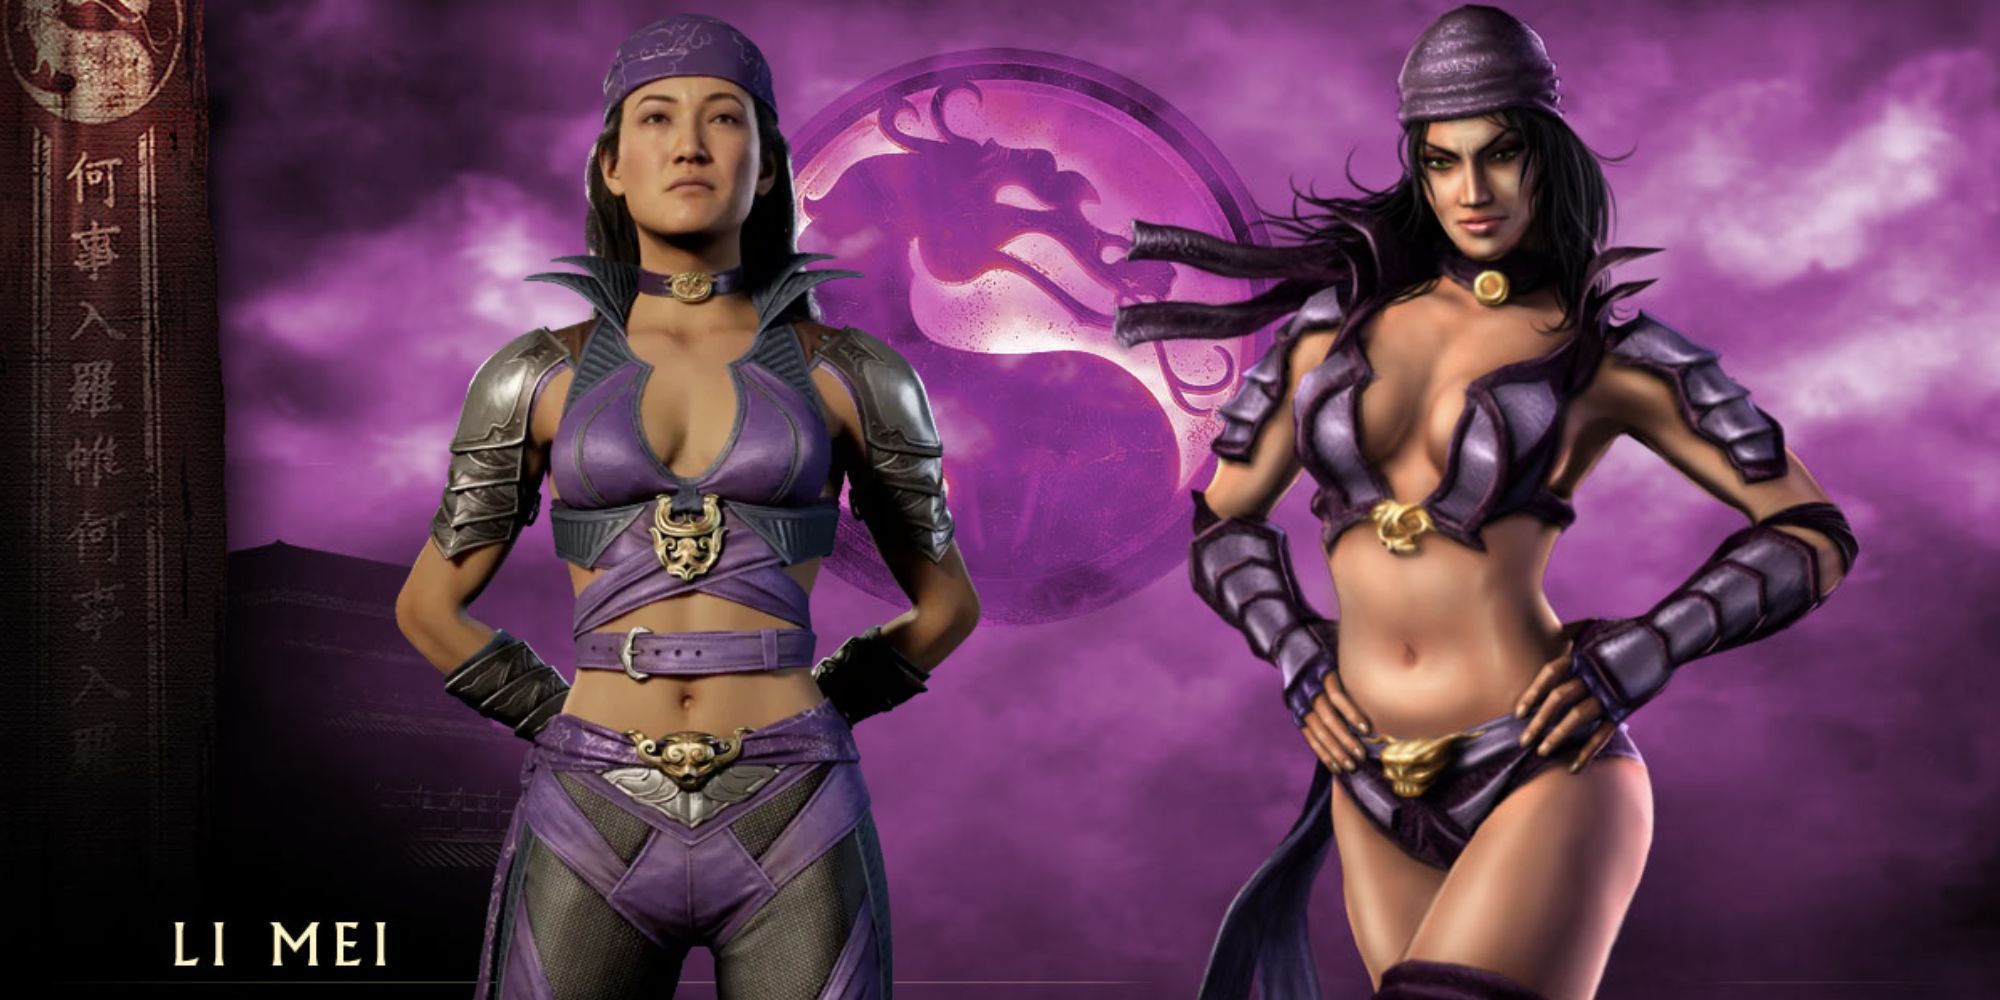 Right: Li Mei in Mortal Kombat 1. Left: Li Mei in Mortal Kombat: Deception. The main difference is that the one on the left looks older and more covered up. The one of the right is younger, dressed in a purple bikini